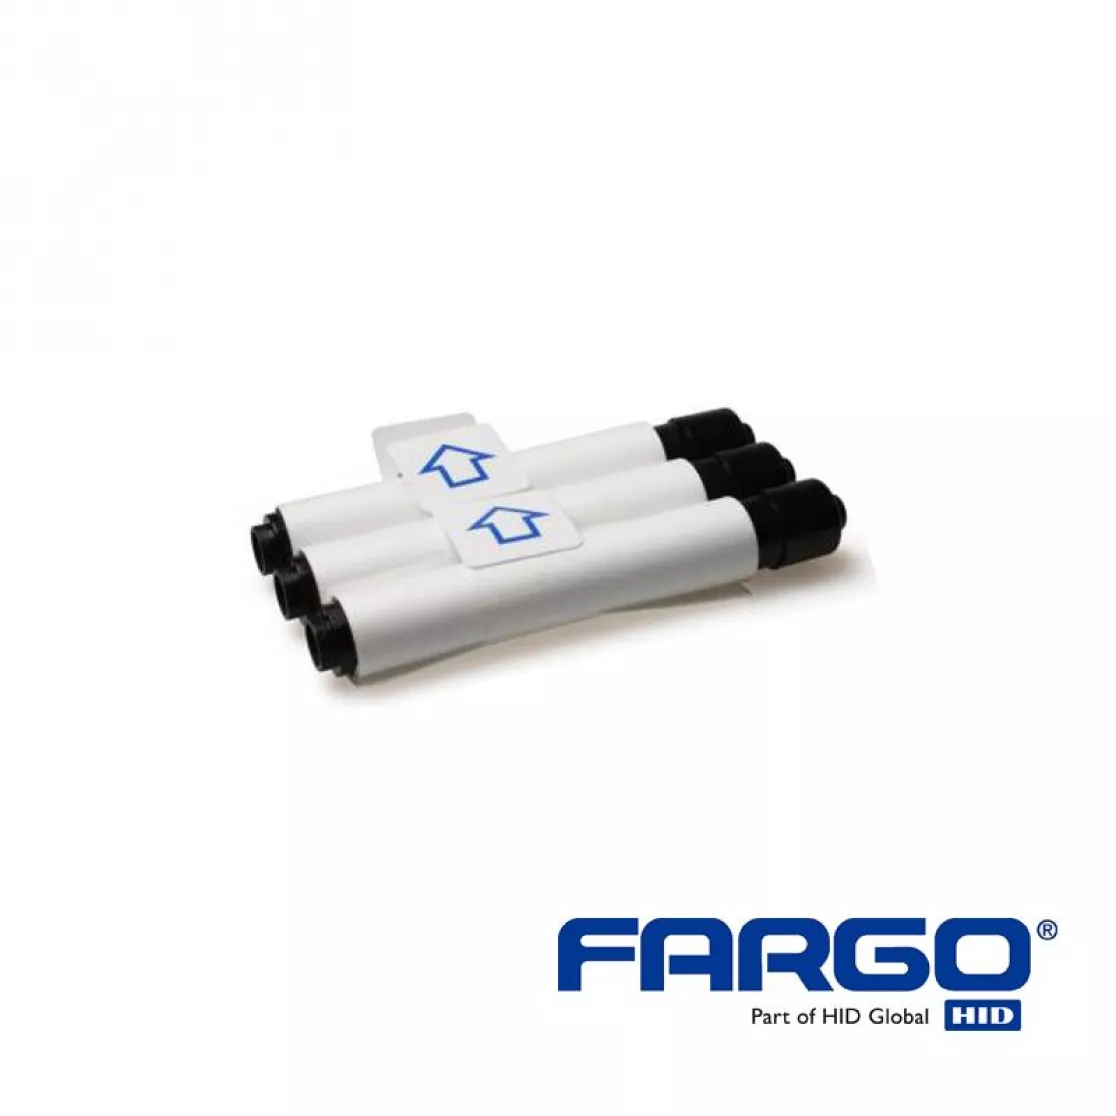 Cleaning rollers for hid fargo dtc1250e card printer